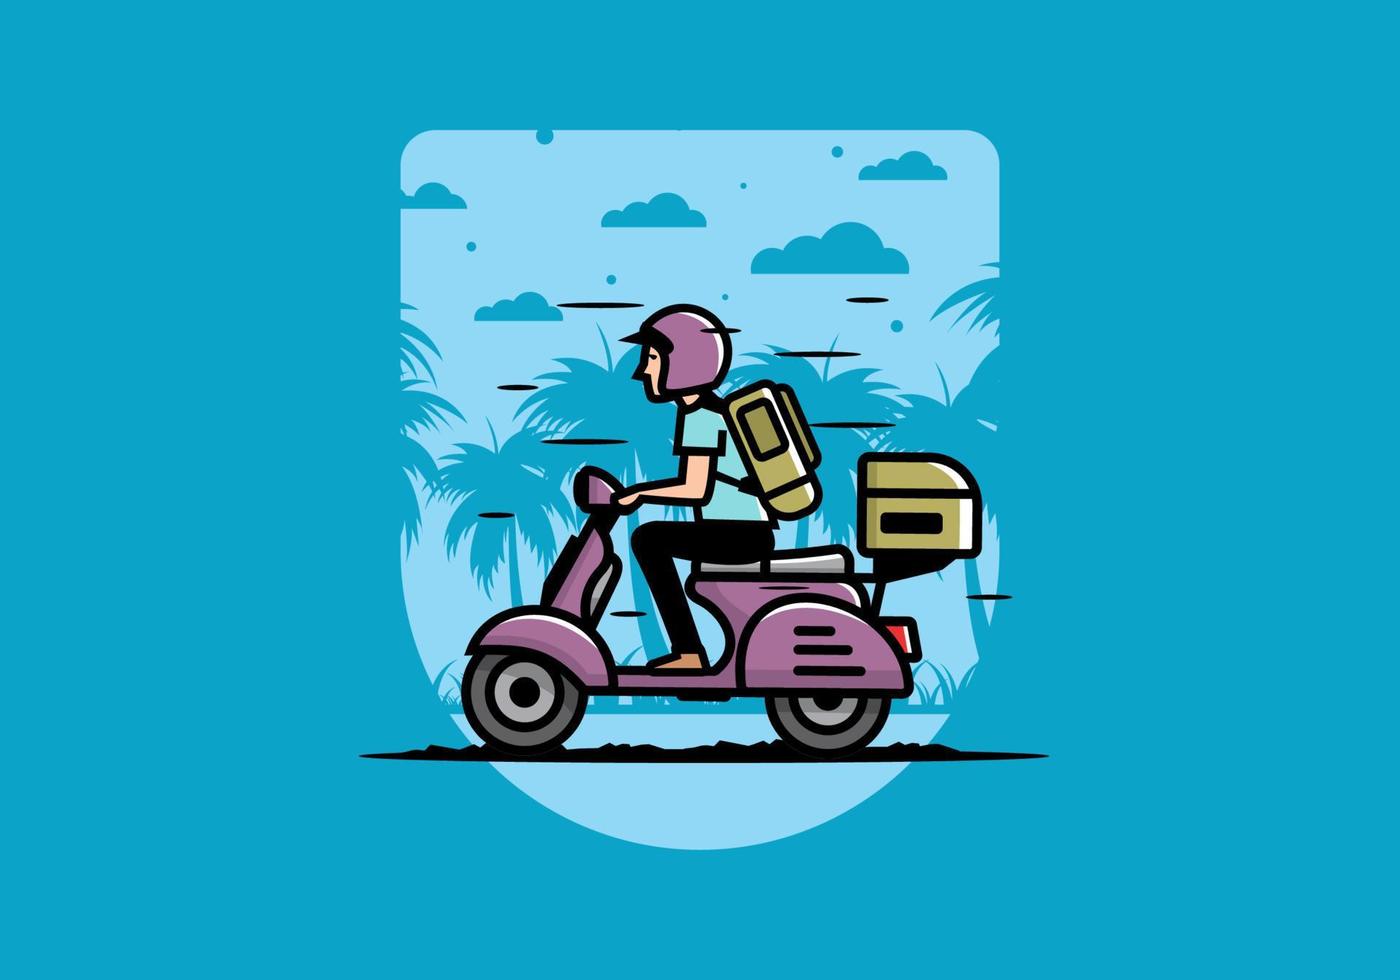 Man goes on vacation riding scooter illustration vector